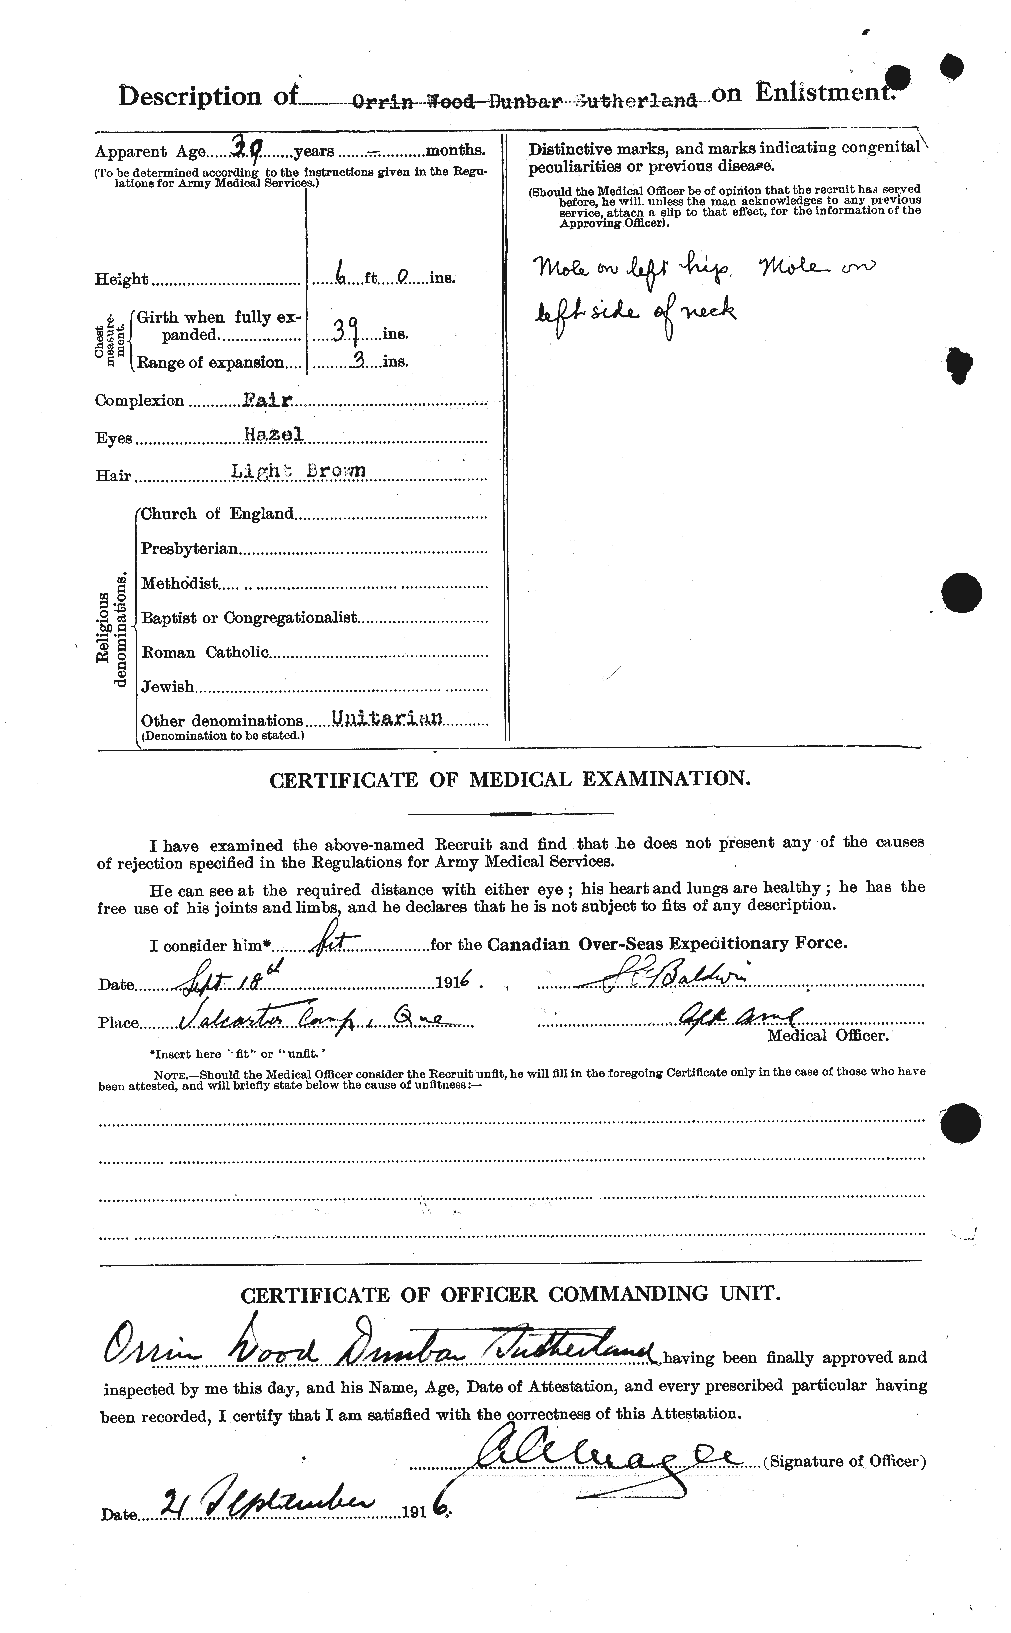 Personnel Records of the First World War - CEF 126829b